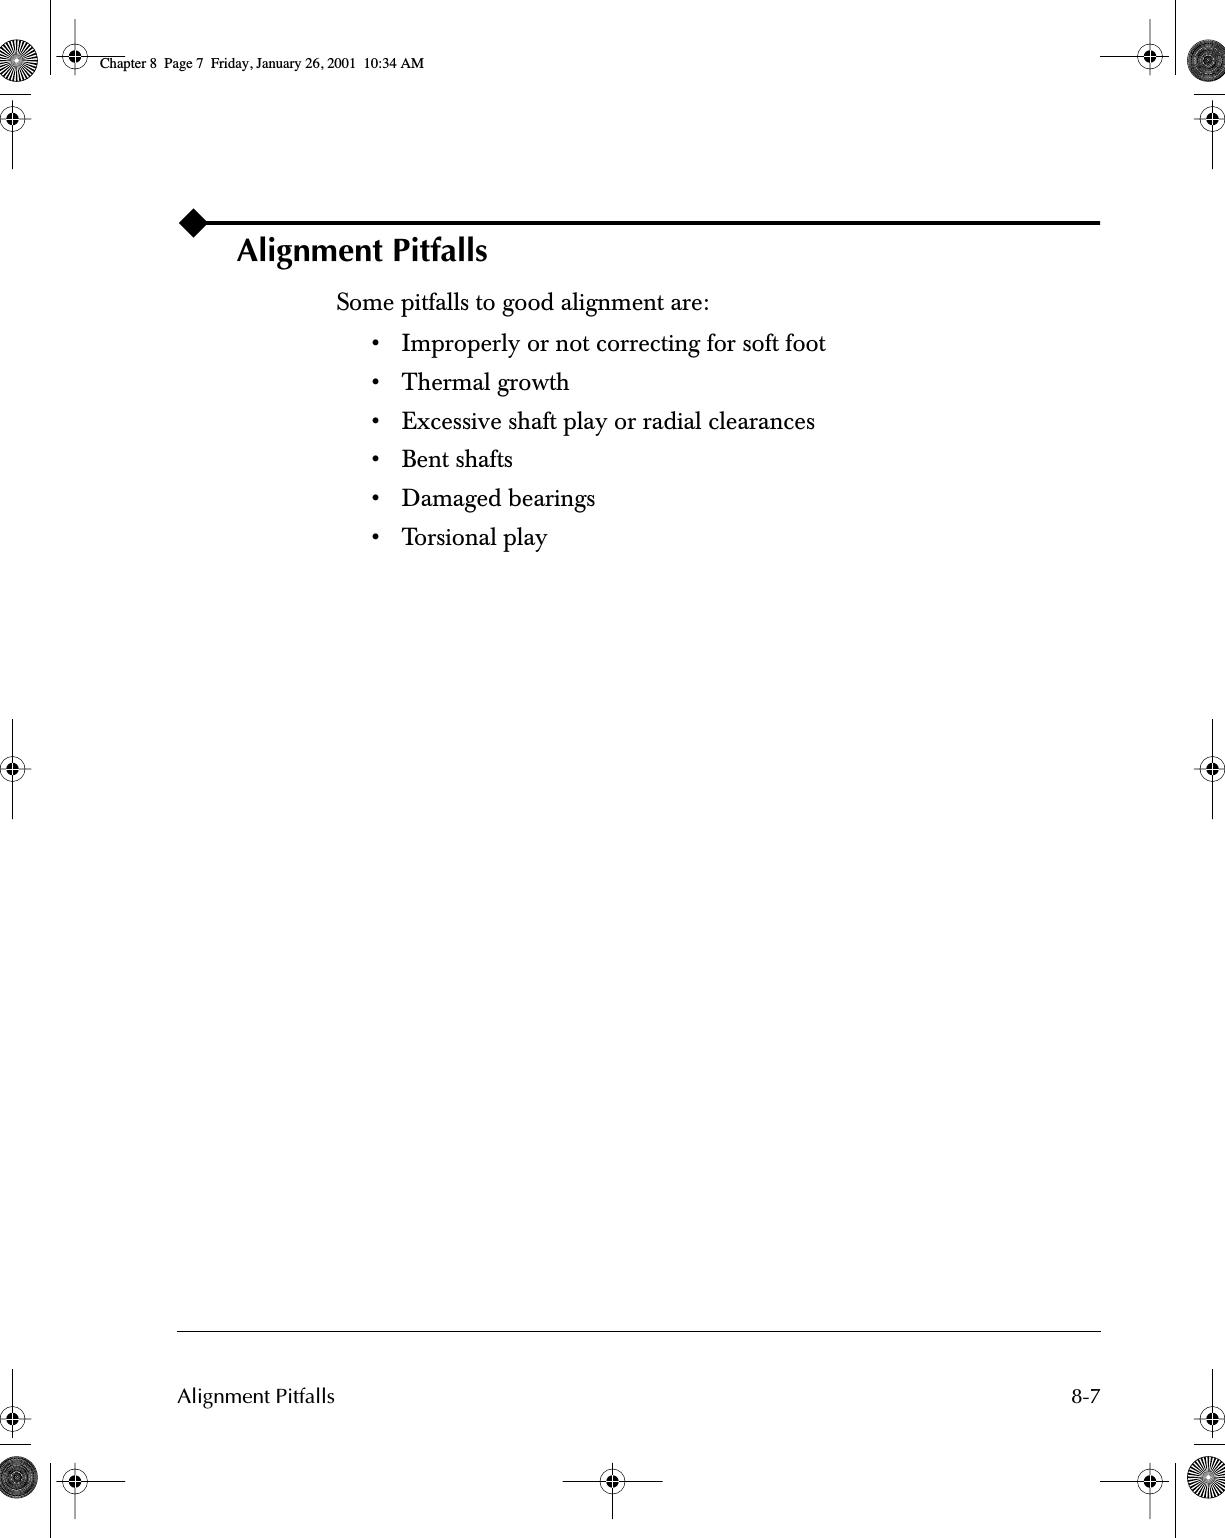  8-7Alignment Pitfalls Alignment Pitfalls Some pitfalls to good alignment are:• Improperly or not correcting for soft foot• Thermal growth• Excessive shaft play or radial clearances• Bent shafts• Damaged bearings• Torsional play Chapter 8  Page 7  Friday, January 26, 2001  10:34 AM